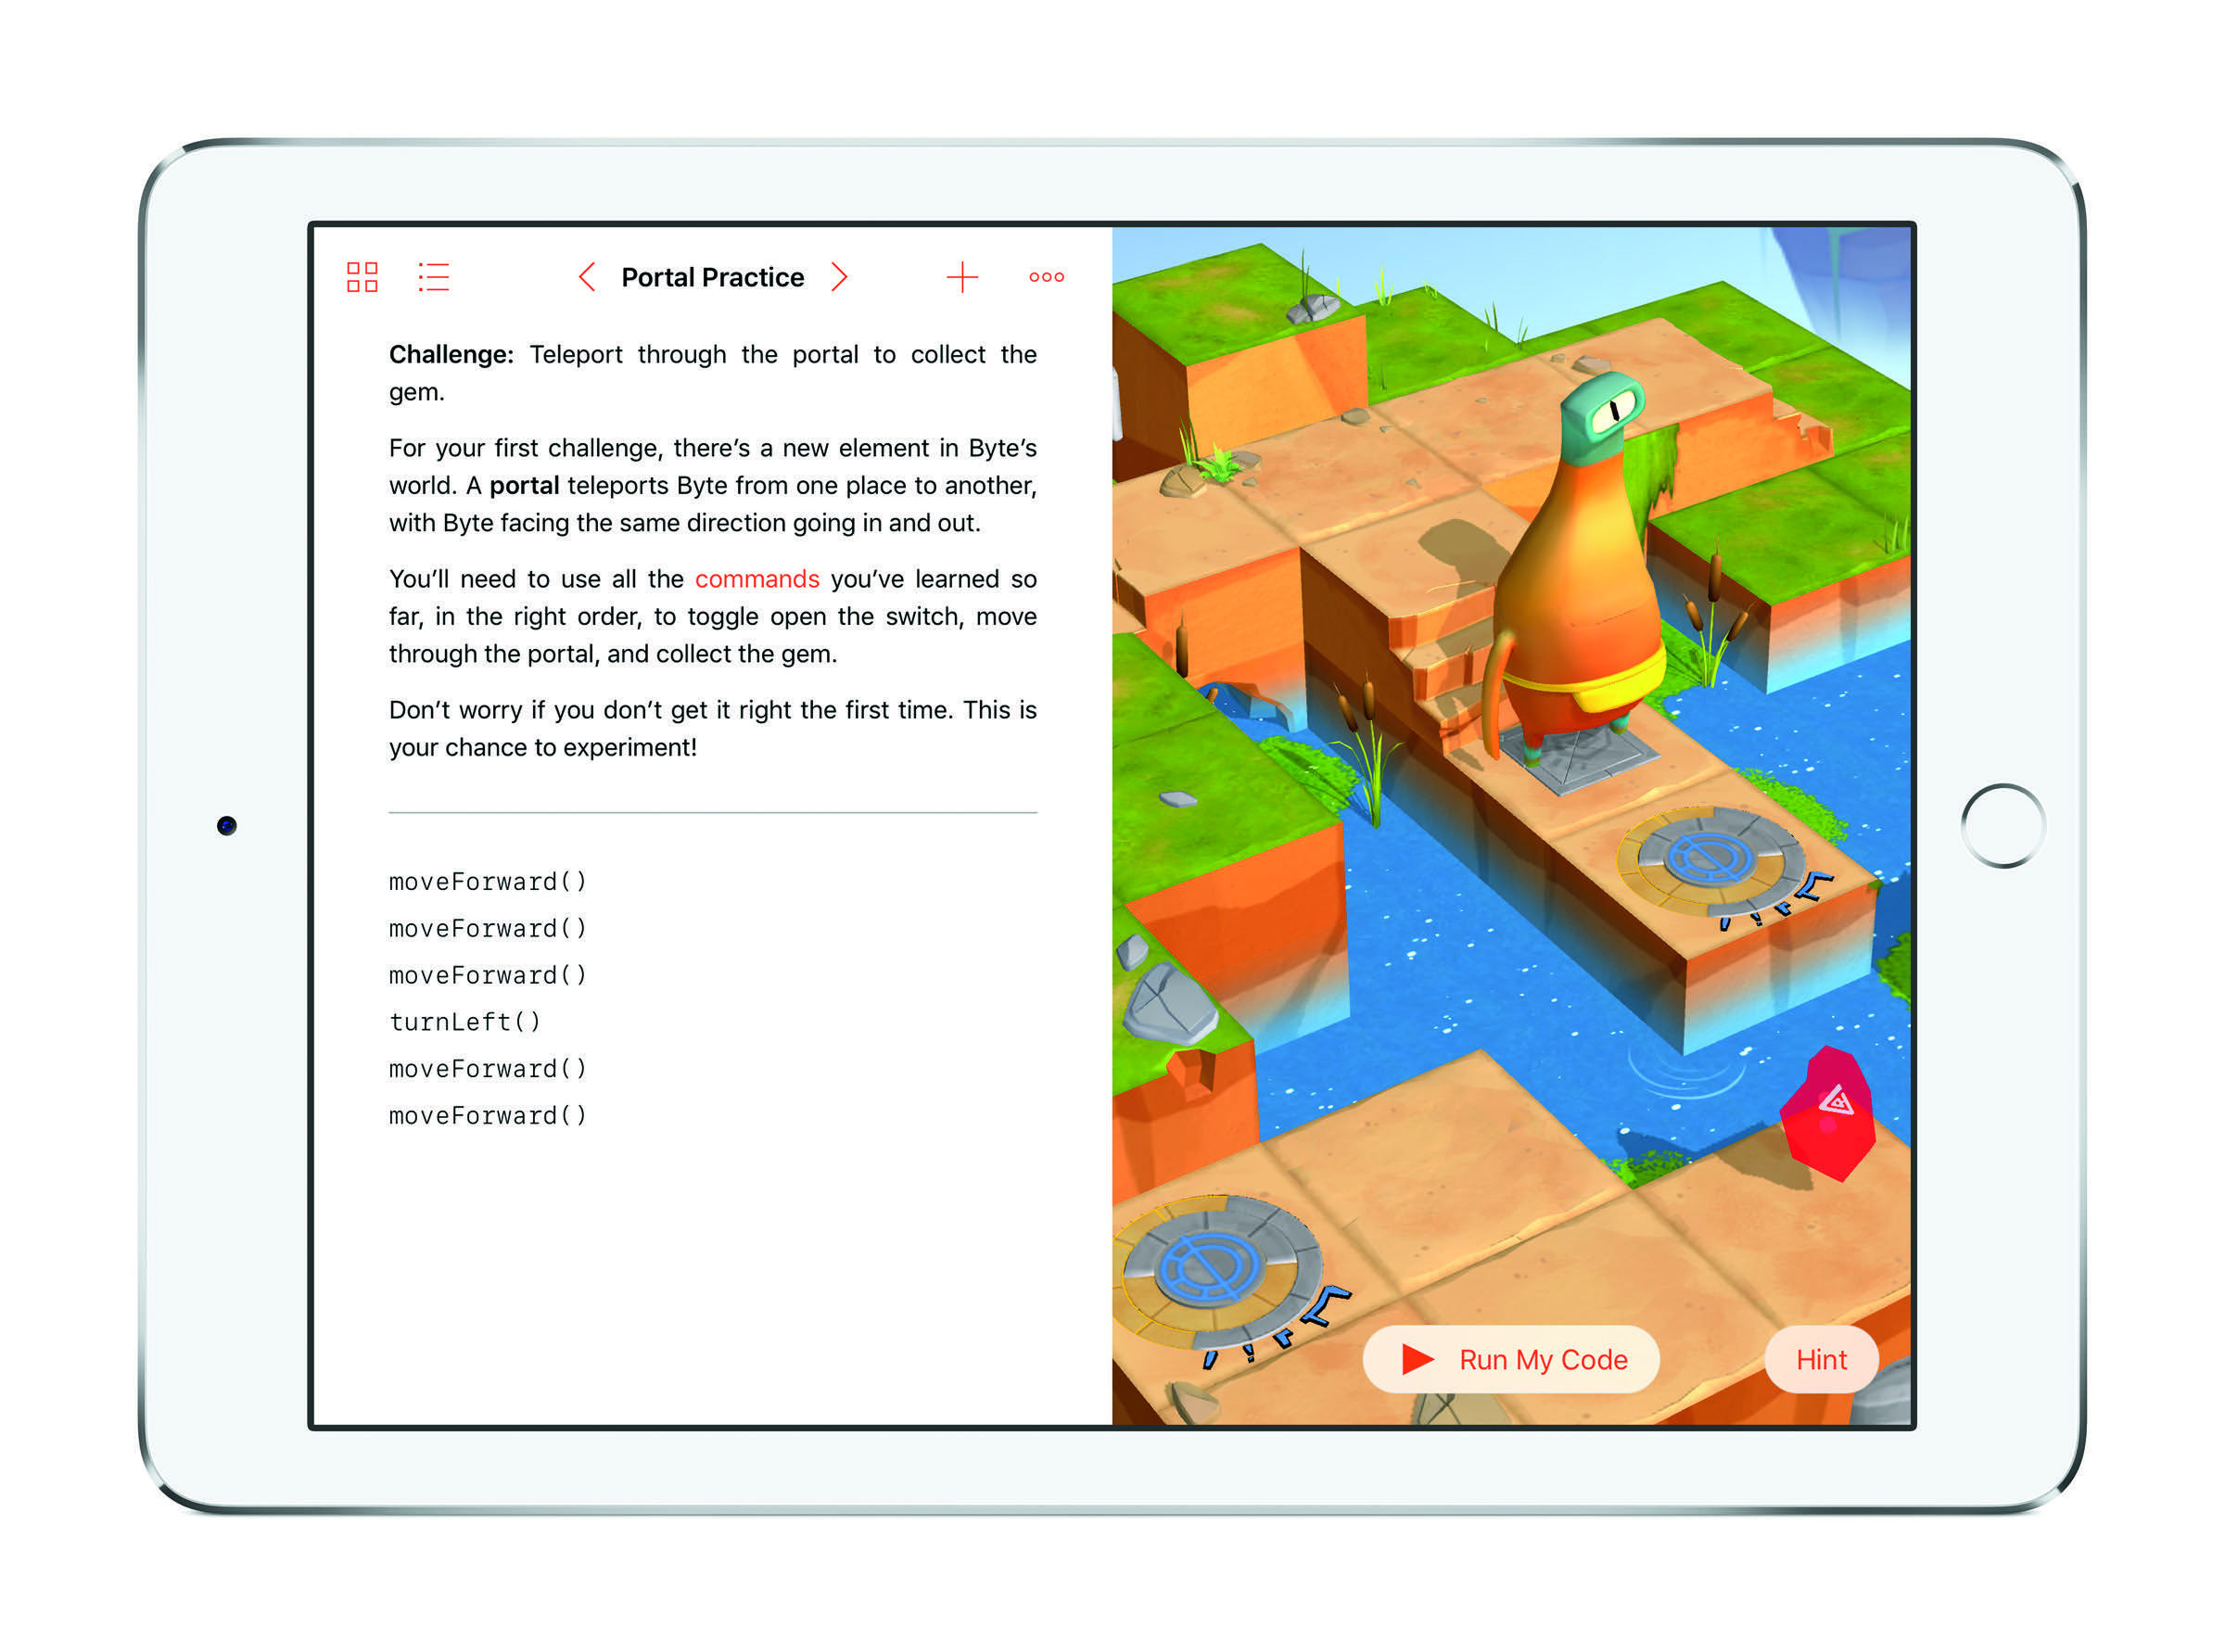 Coding for Kids with Autism – The Ultimate Guide for Parents and Educators